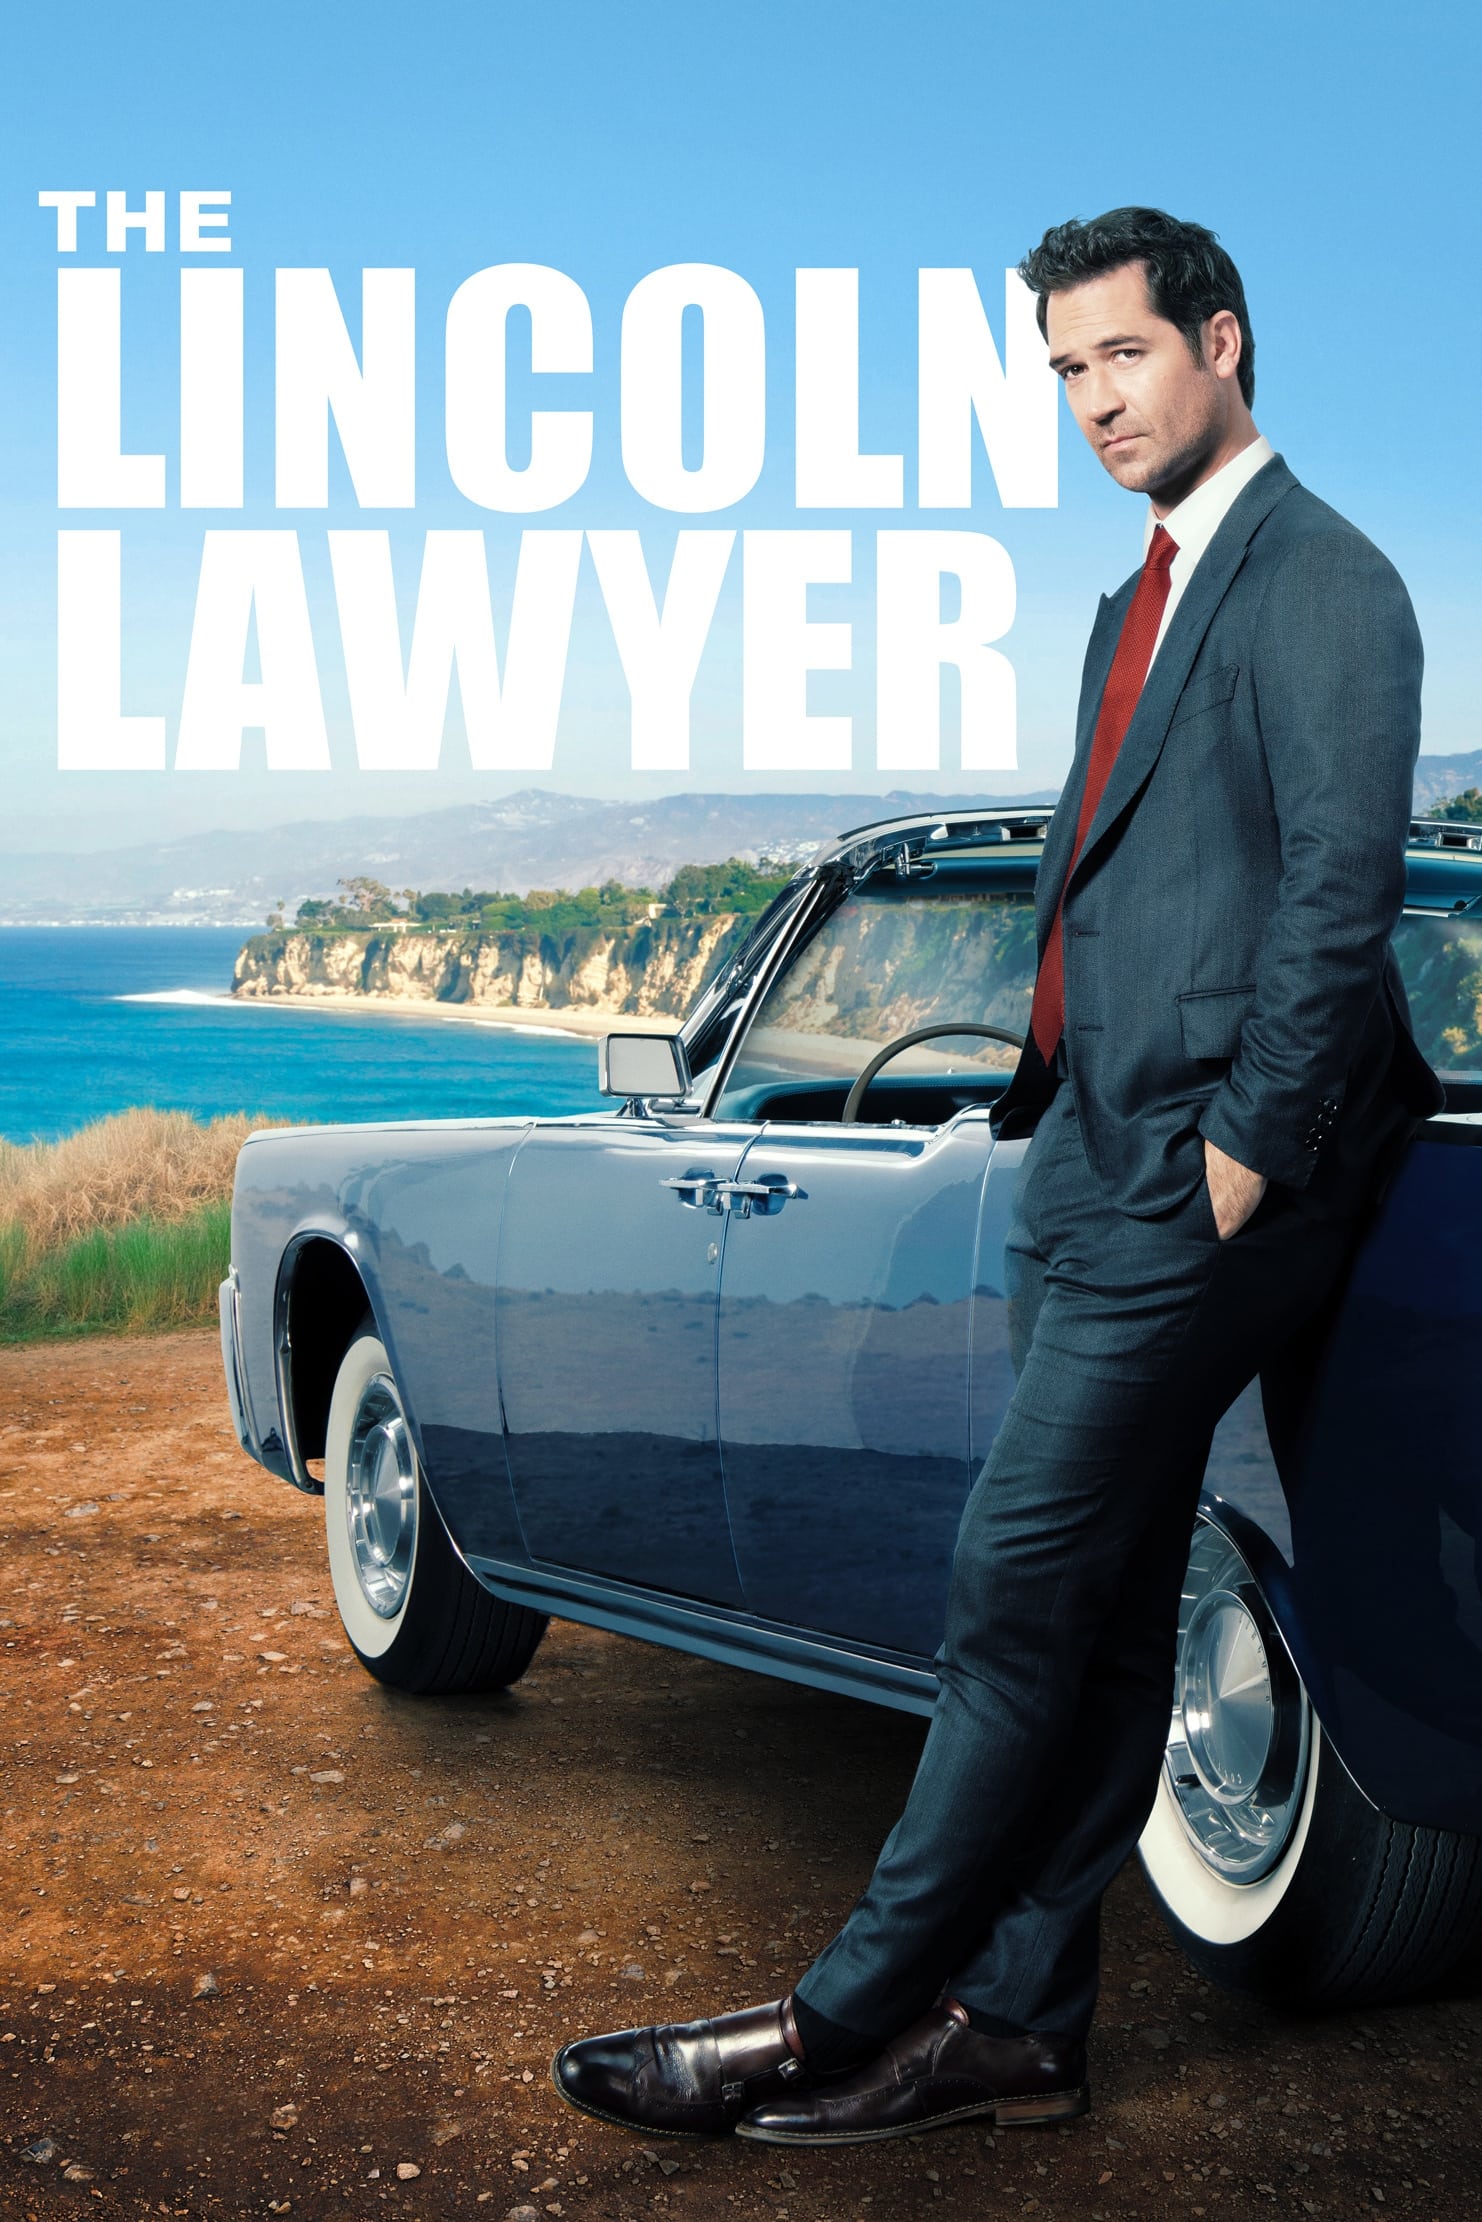 The Lincoln Lawyer TV Shows About Criminal